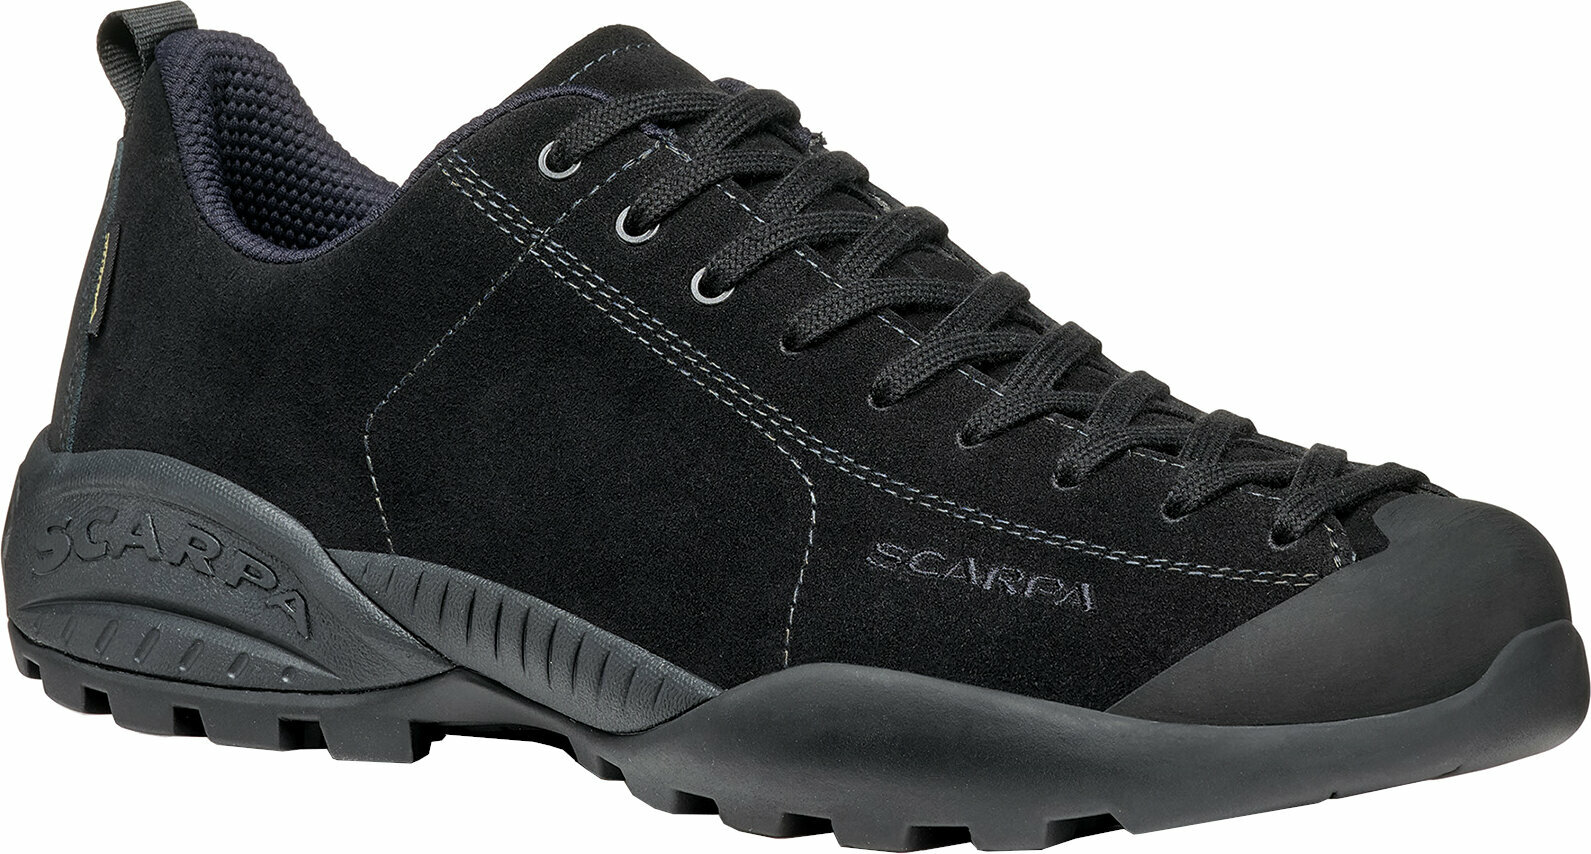 Chaussures outdoor hommes Scarpa Mojito GTX Black 44 Chaussures outdoor hommes